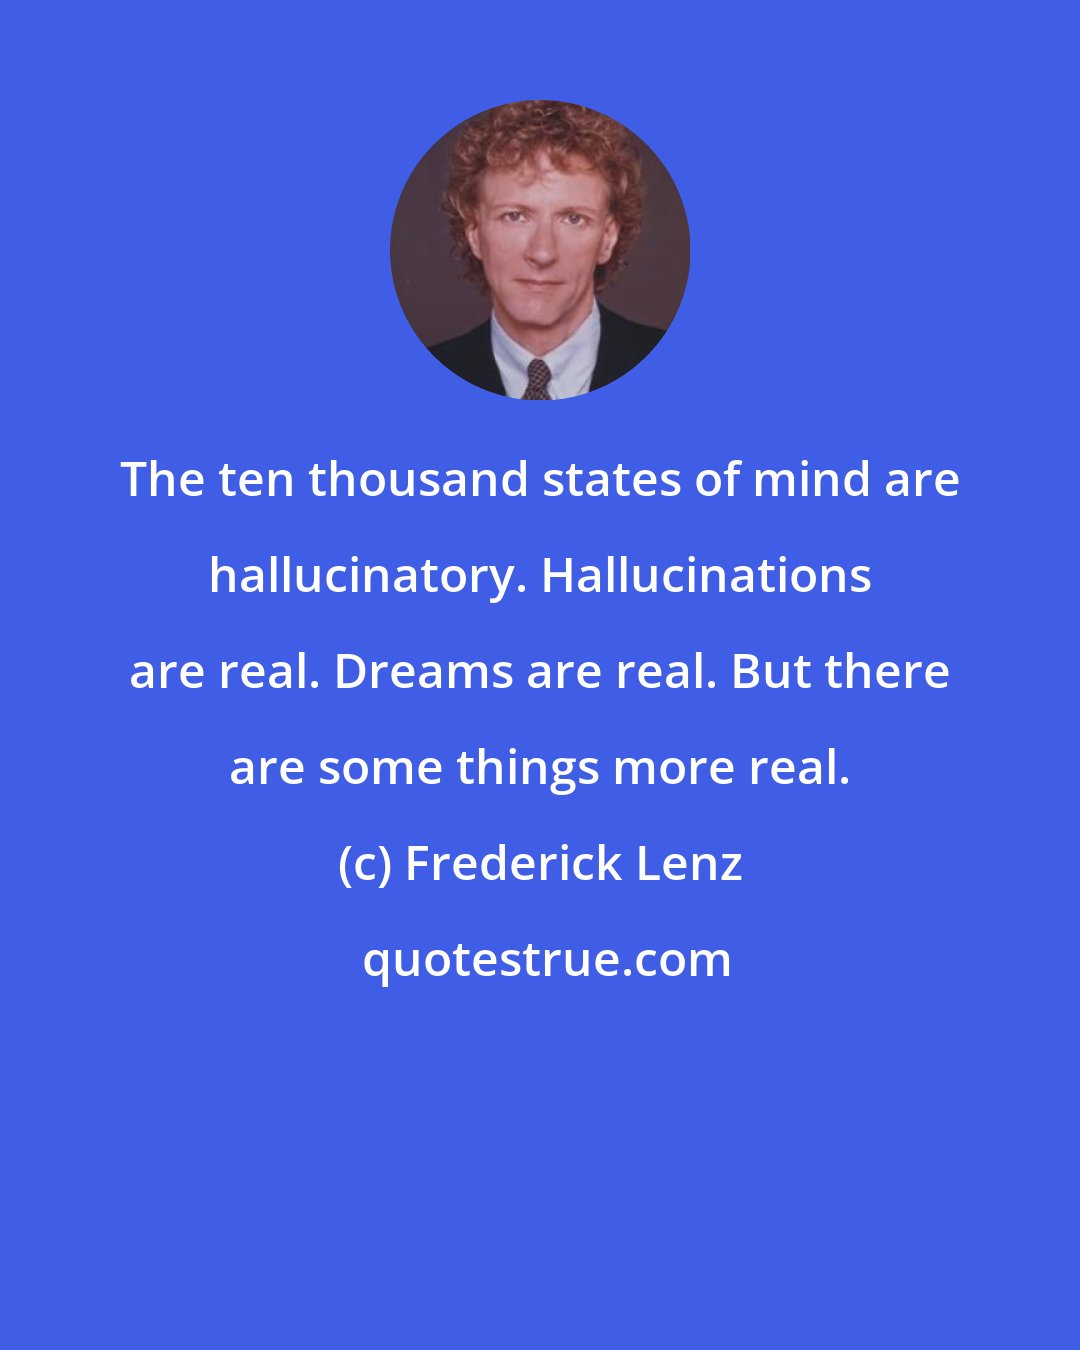 Frederick Lenz: The ten thousand states of mind are hallucinatory. Hallucinations are real. Dreams are real. But there are some things more real.